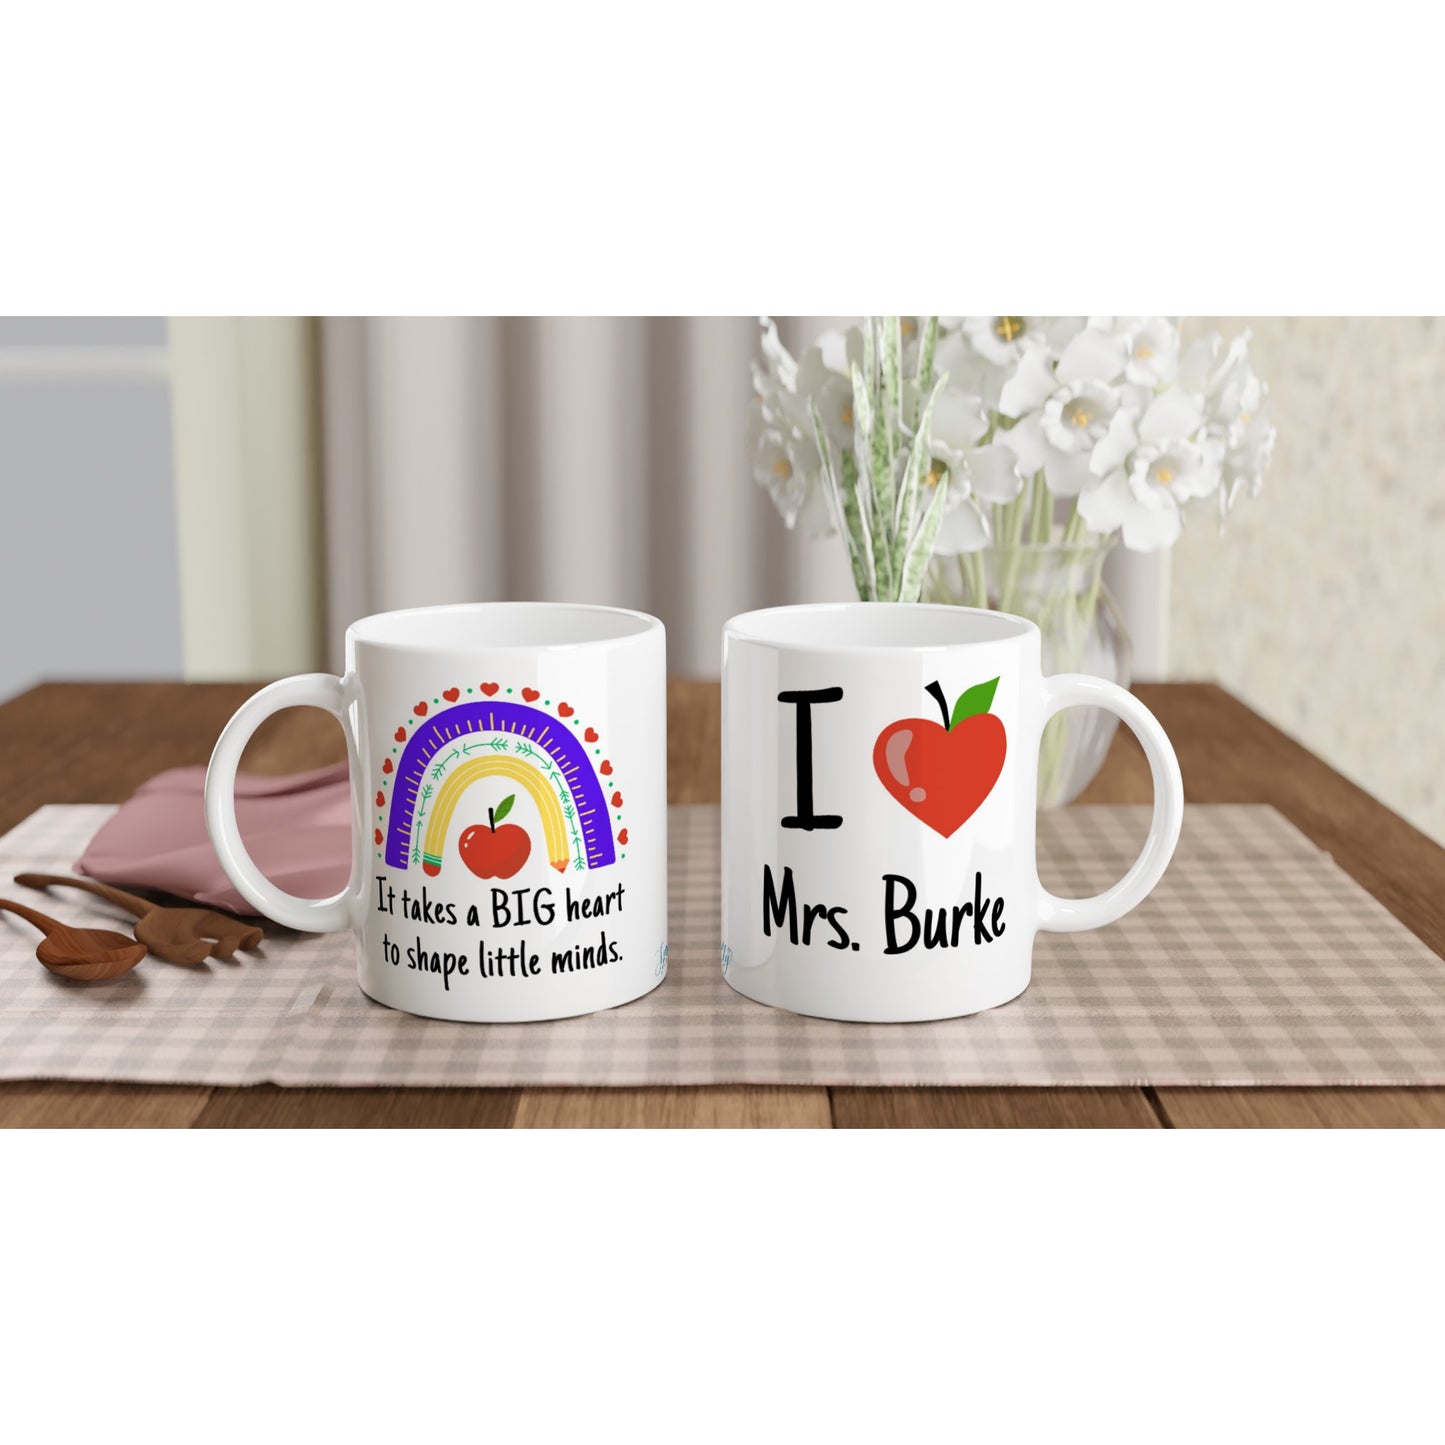 "It takes a big heart to shape little minds." Customizable Name Mug front and back view on table